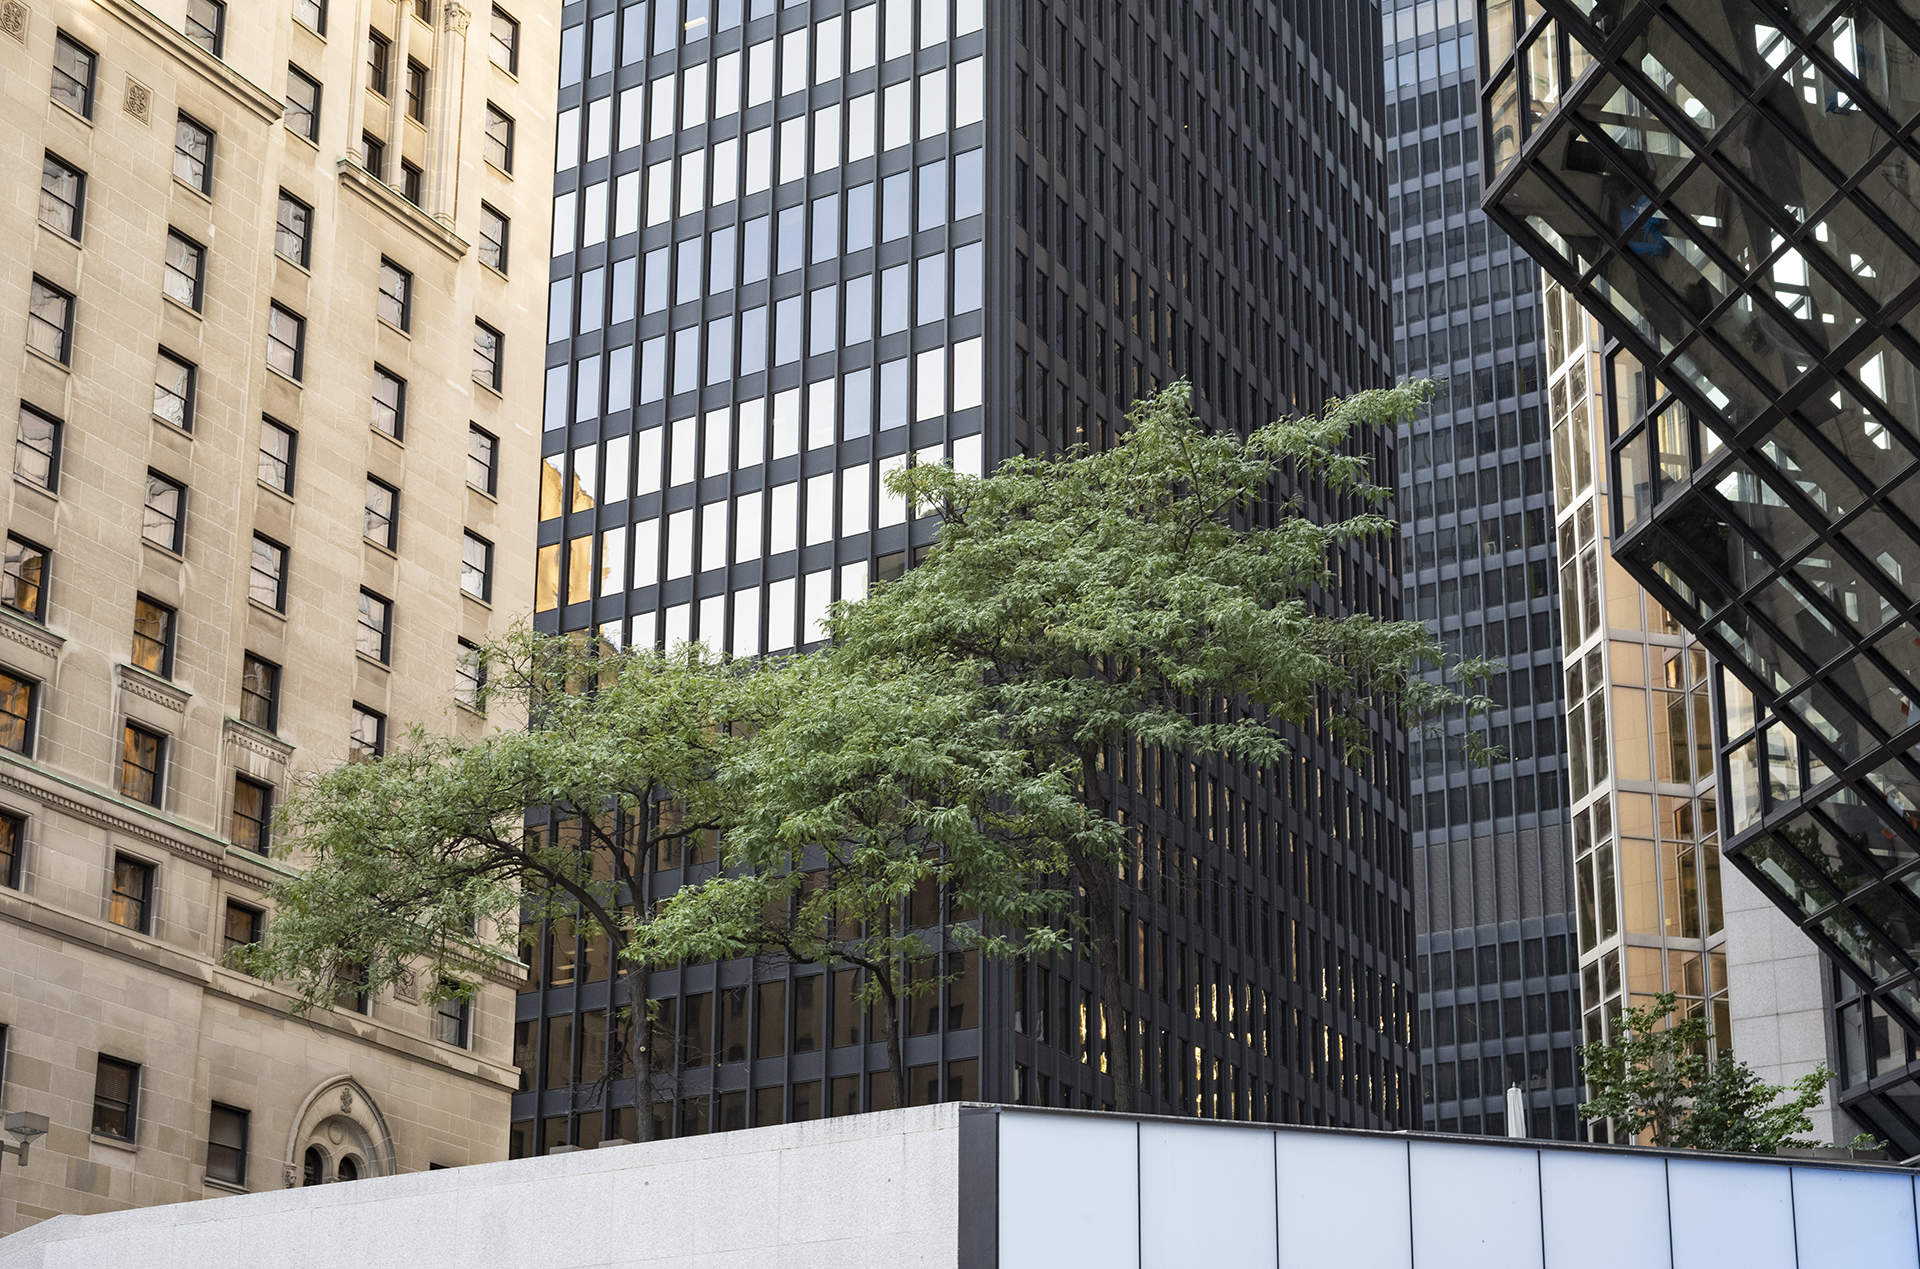 Metropolitan: A photo of a tree surrounded by tall buildings.